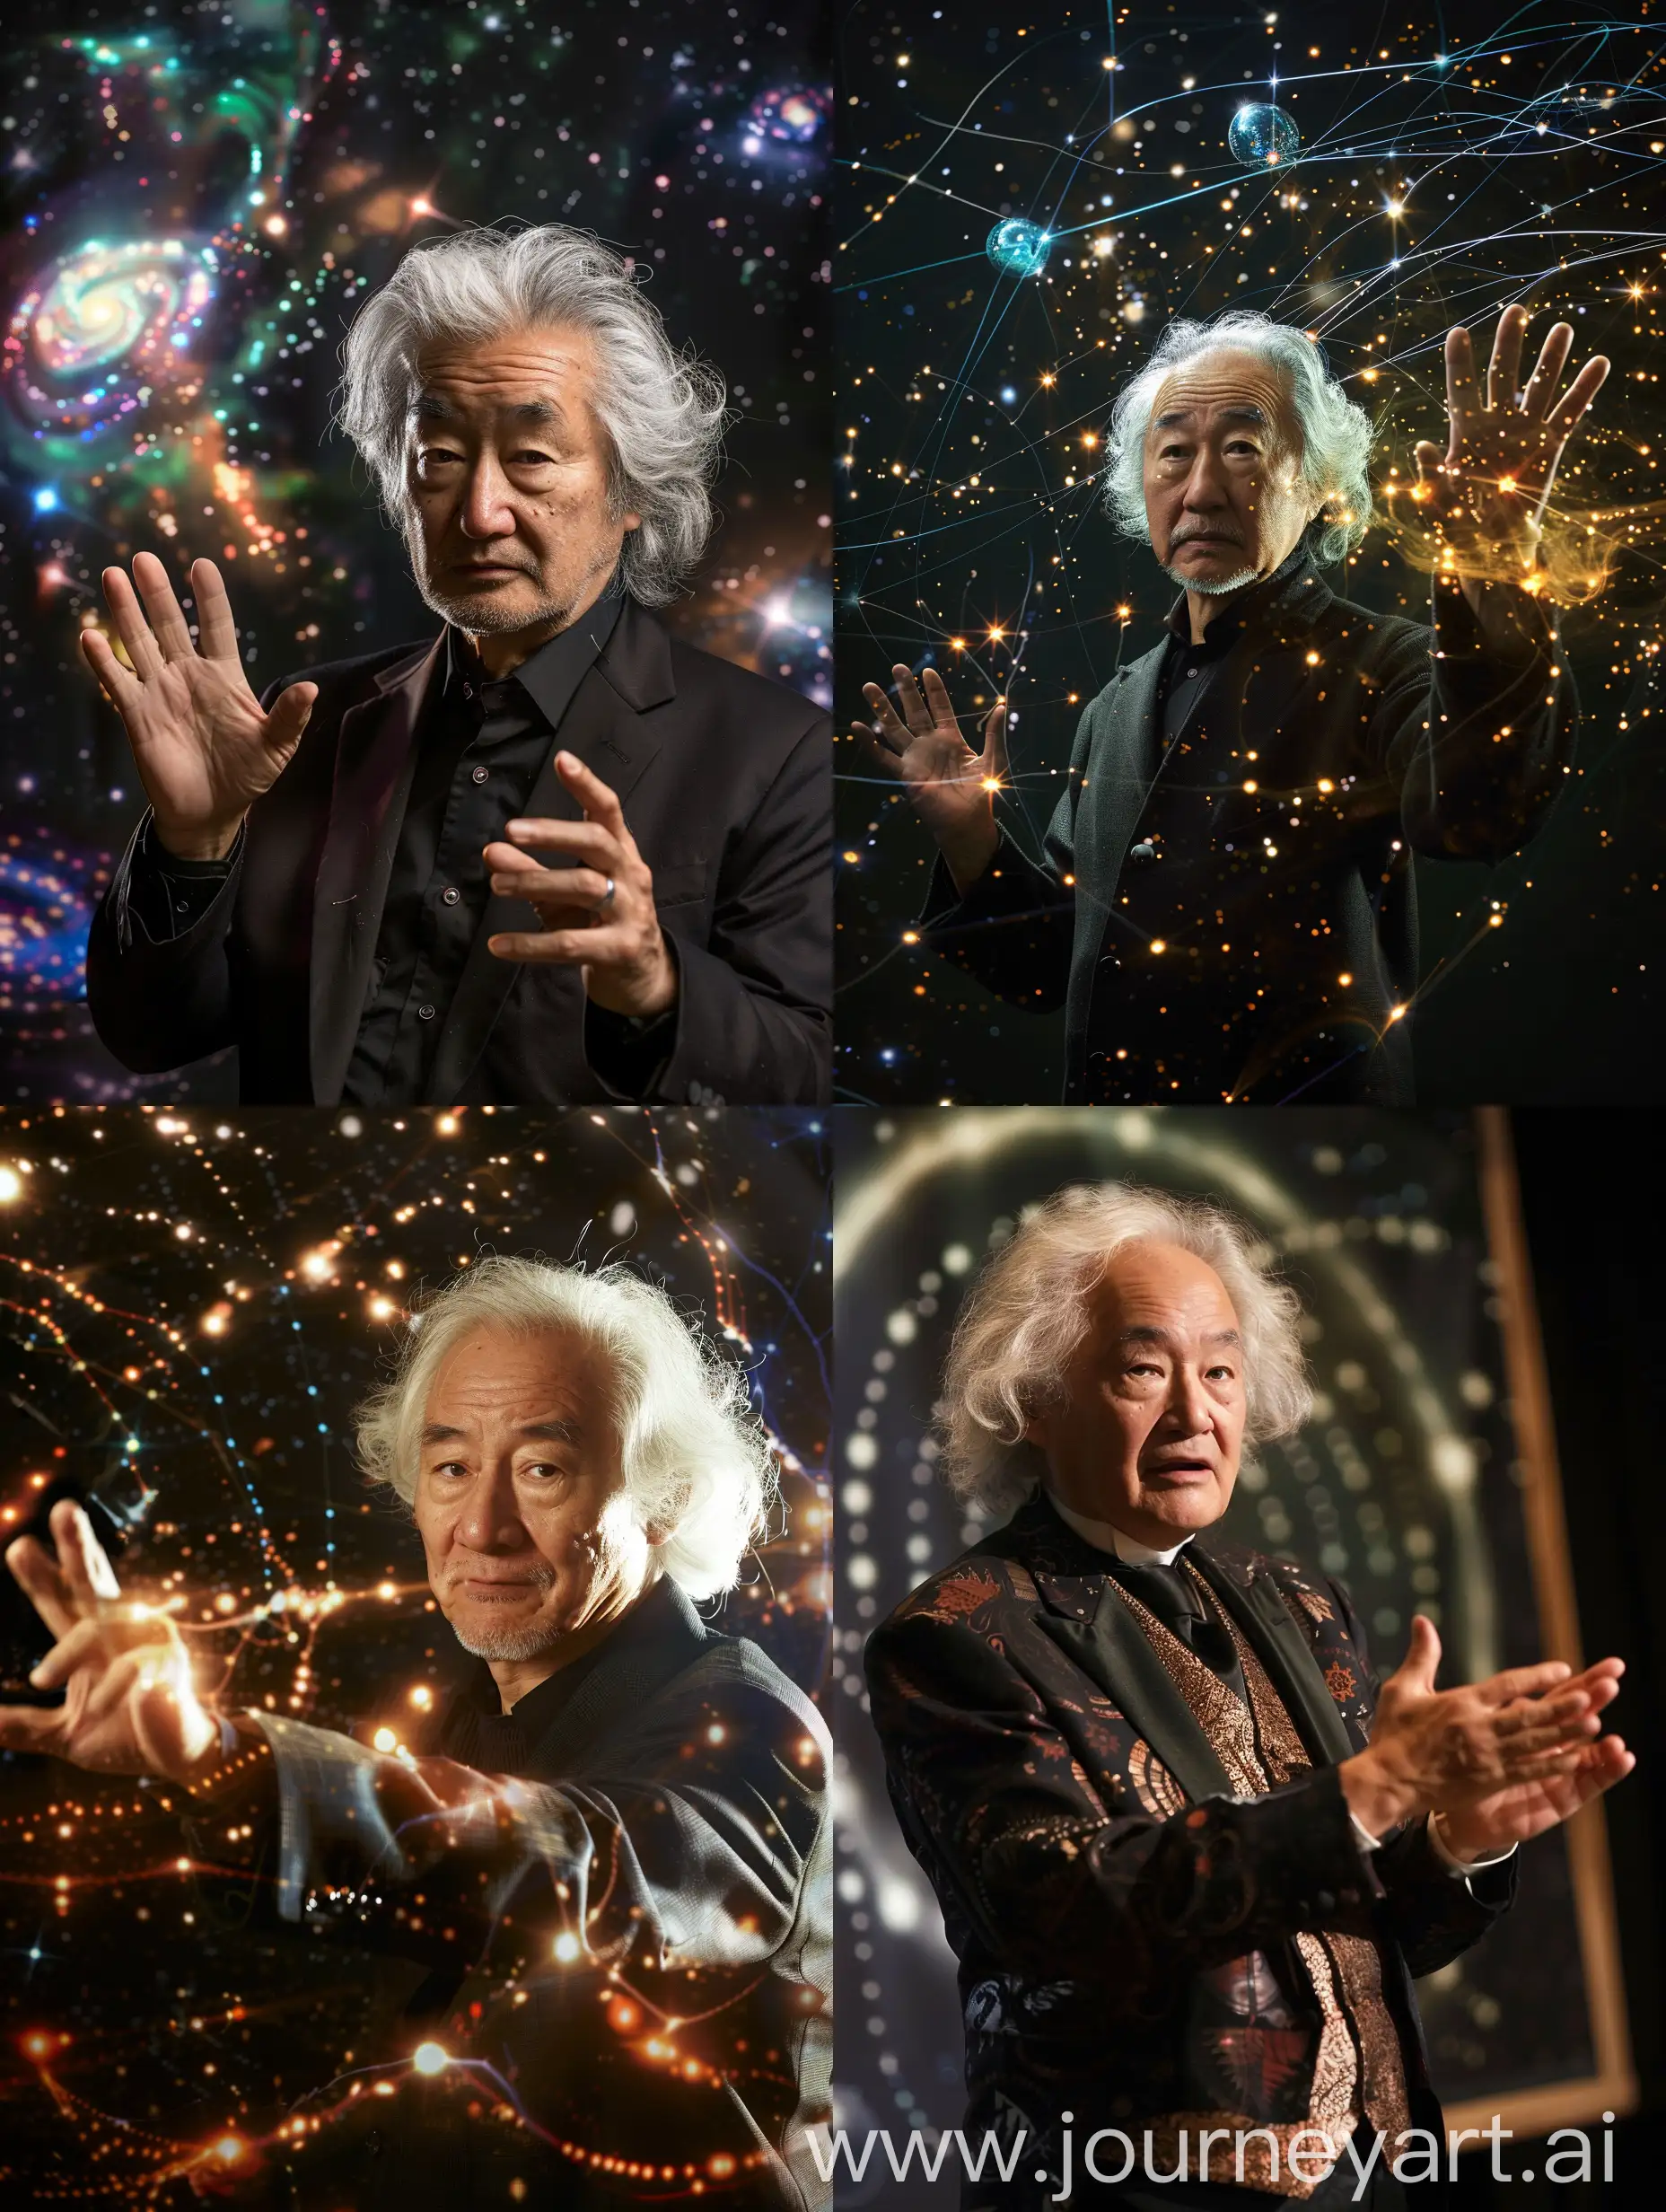 Michio Kaku gesturing to space and time from the torso up